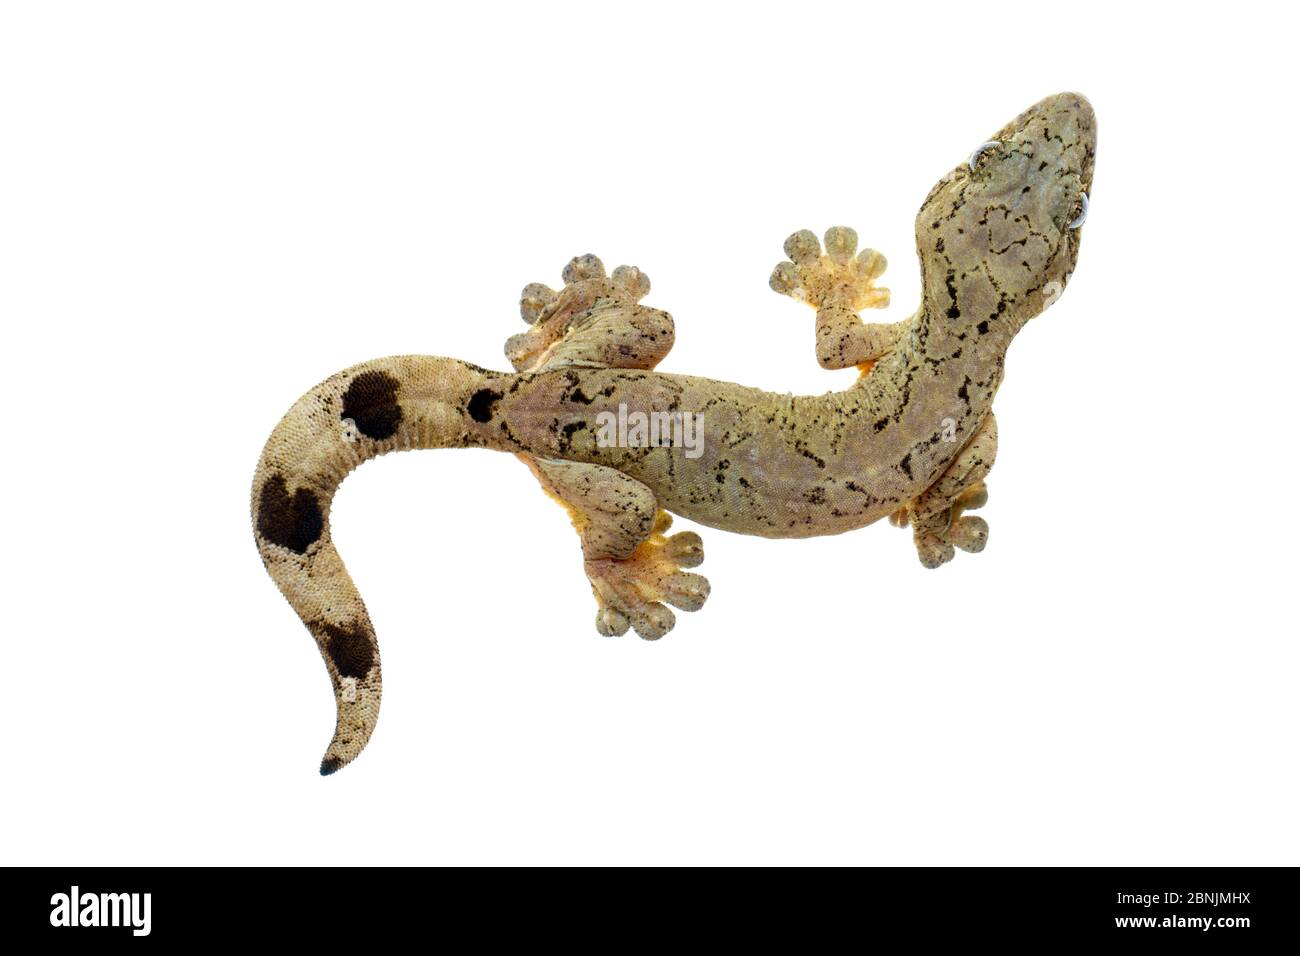 Platydactylus High Resolution Stock Photography and Images - Alamy